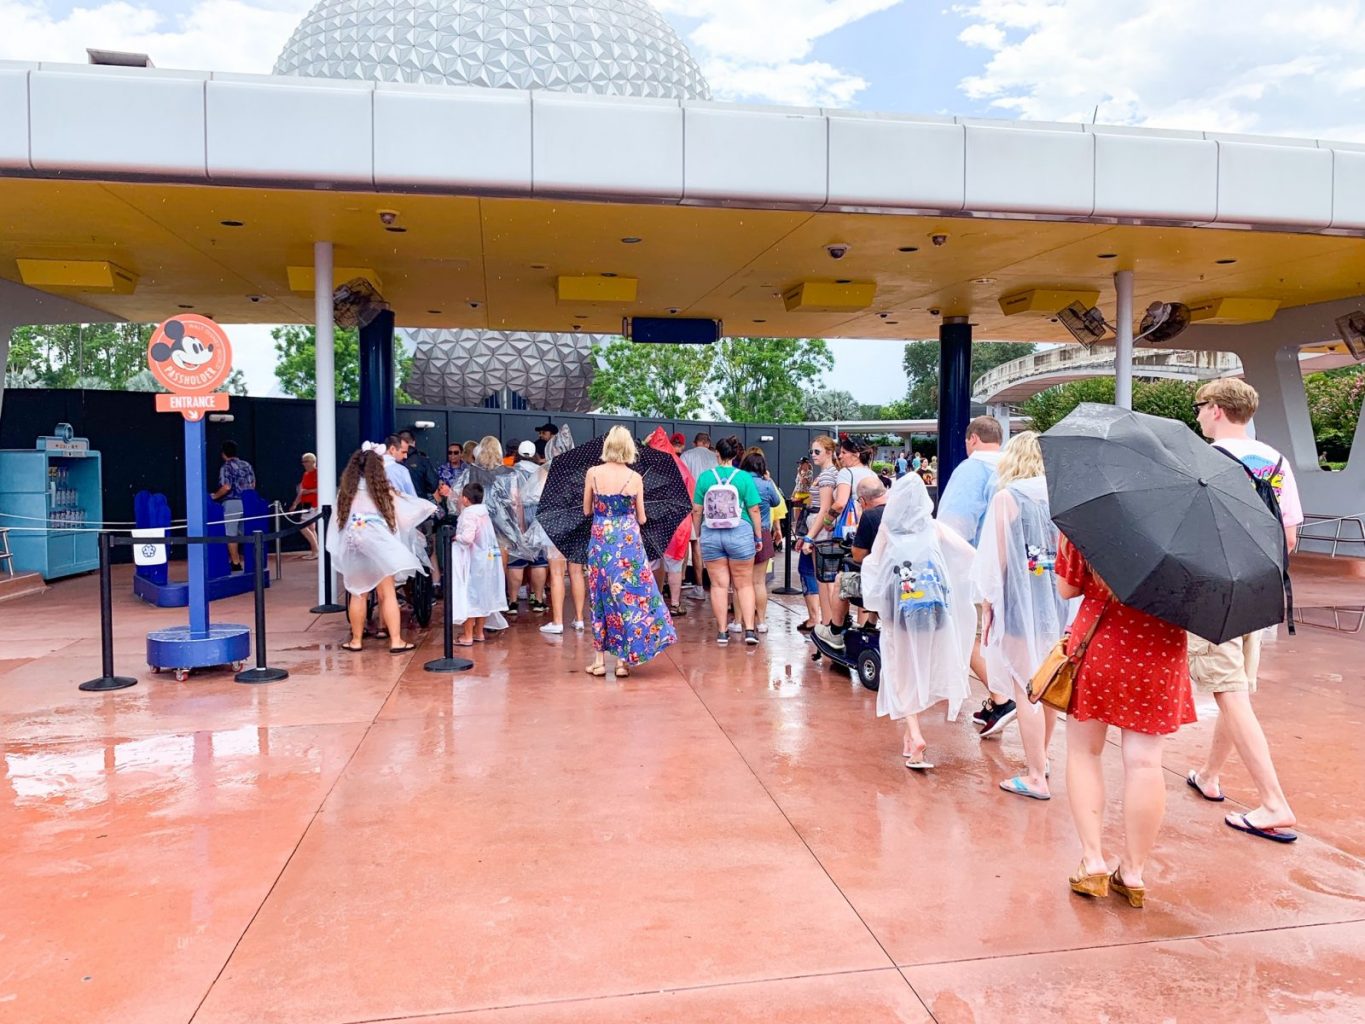 people wearing ponchos and carrying umbrellas while entering Epcot